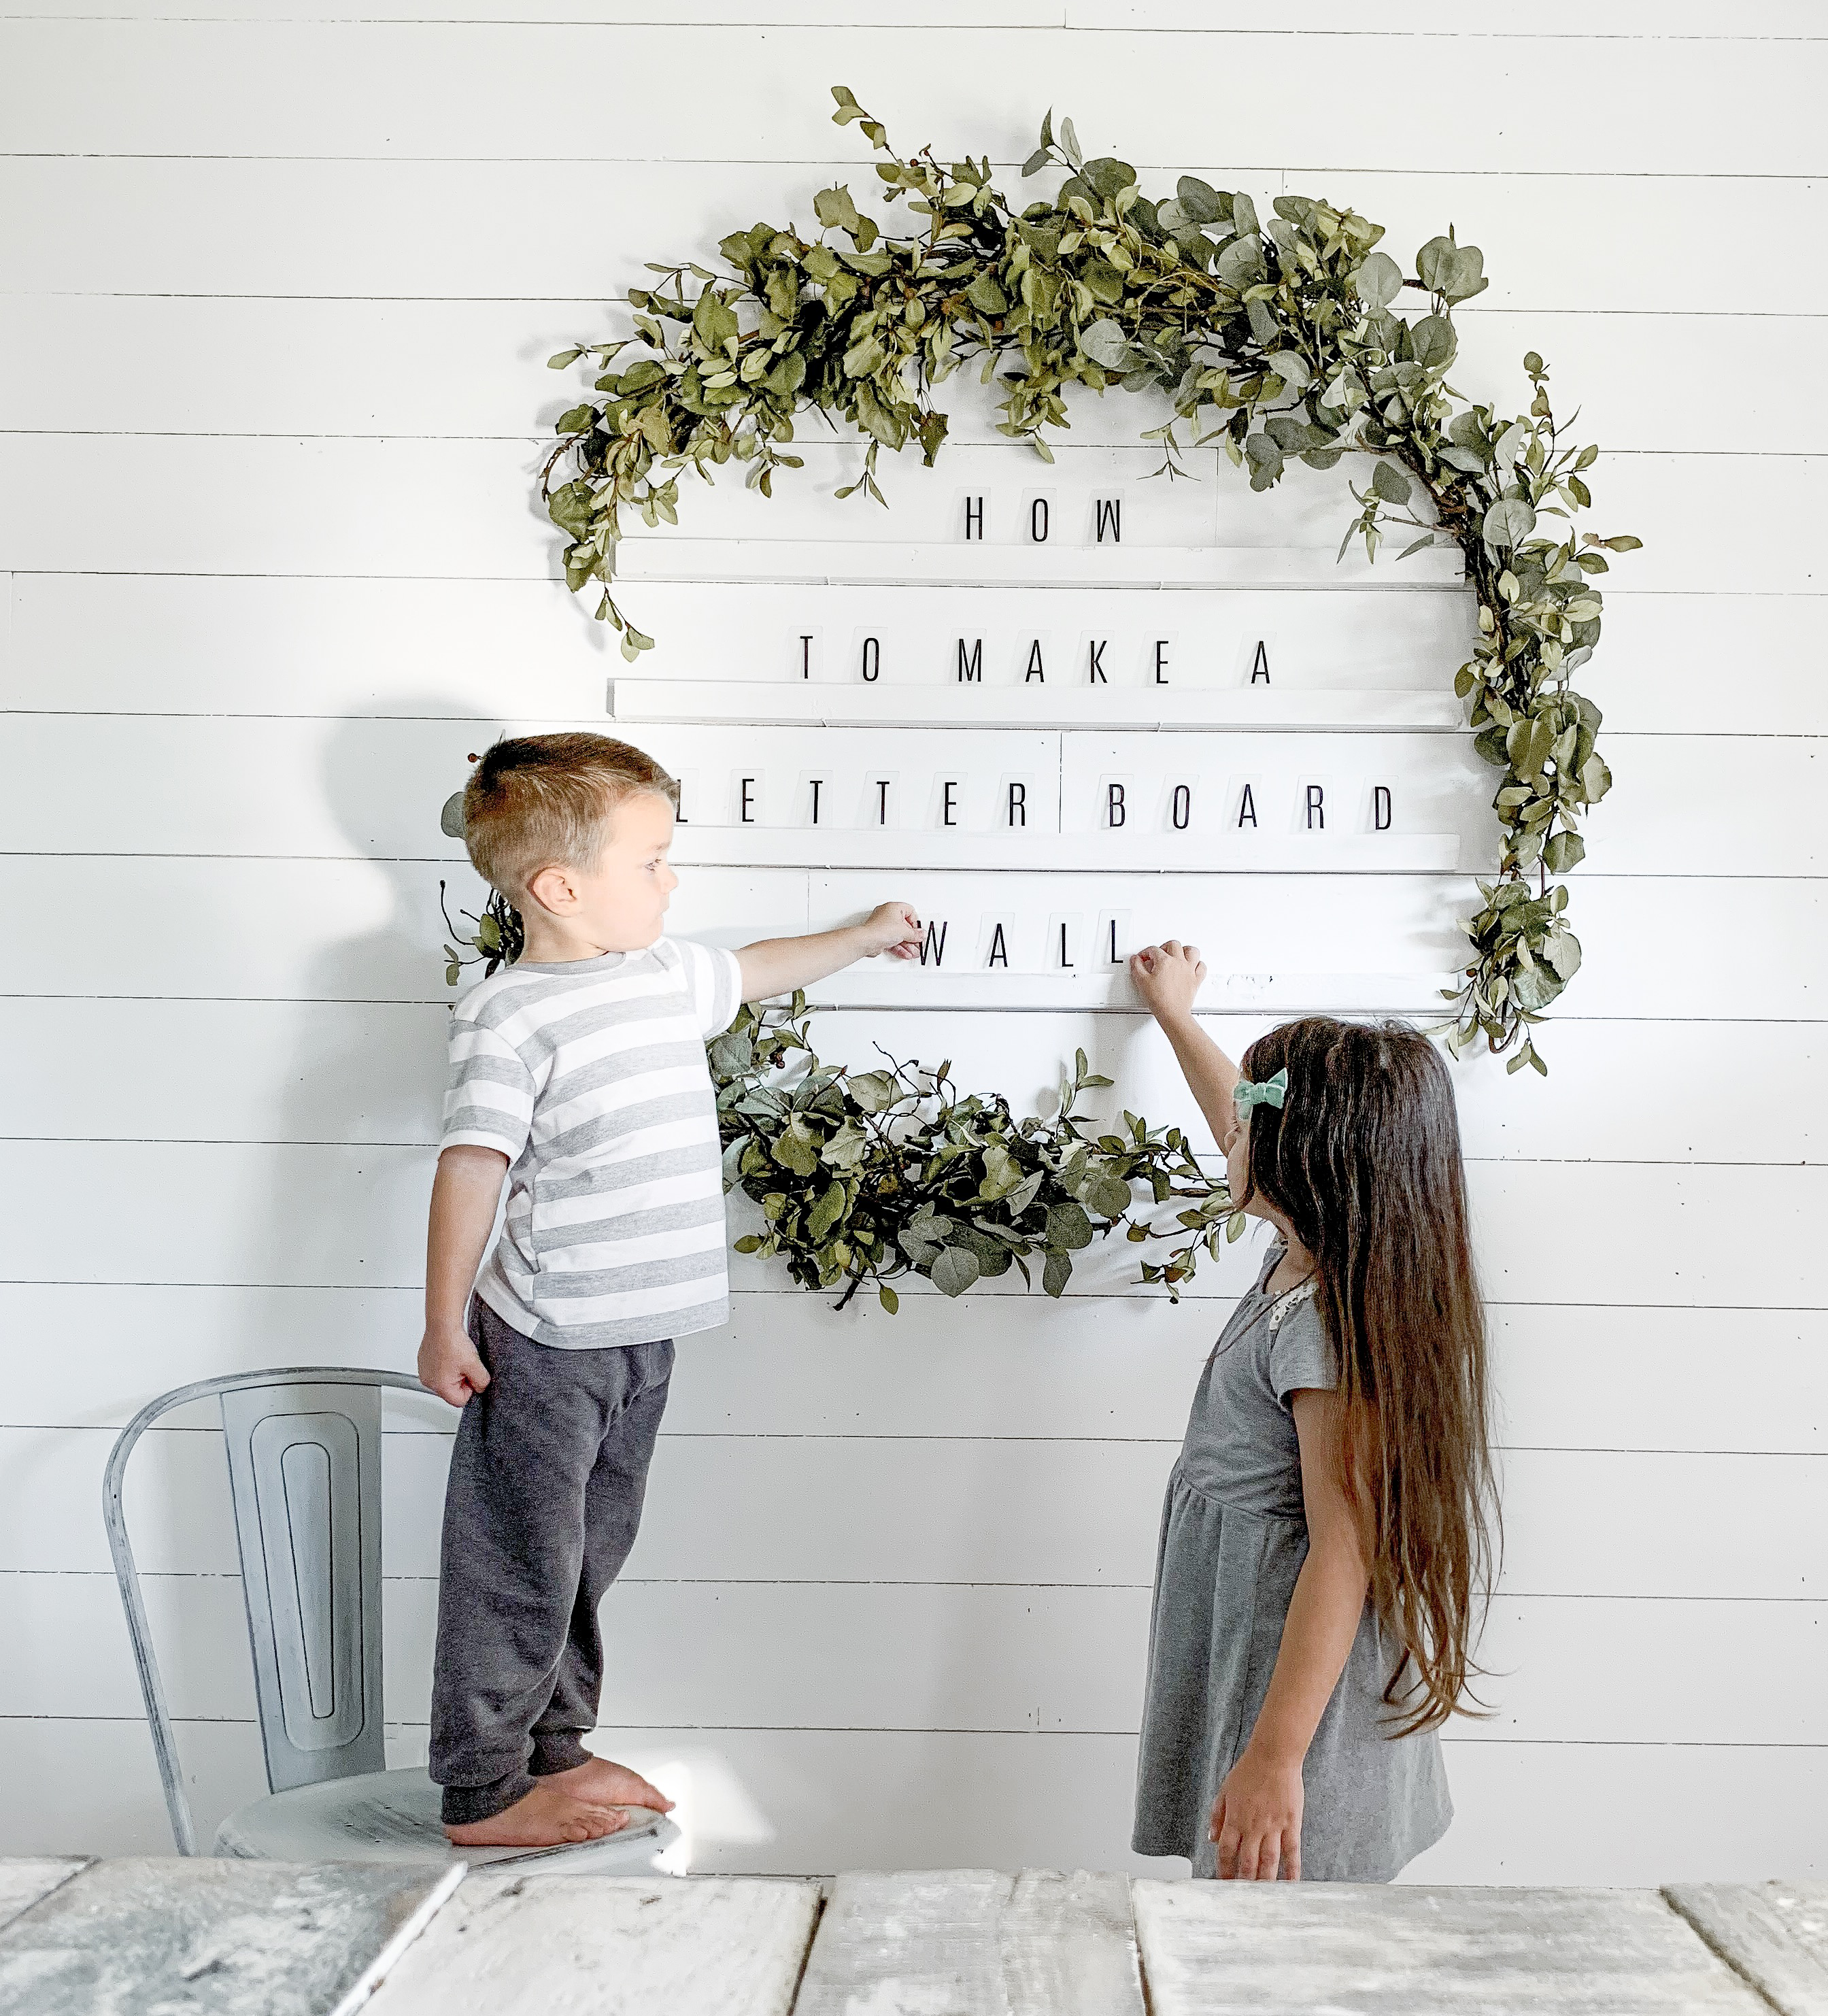 How To Make An Oversized Letter Board Wall + DIY Giant Holiday Wreath